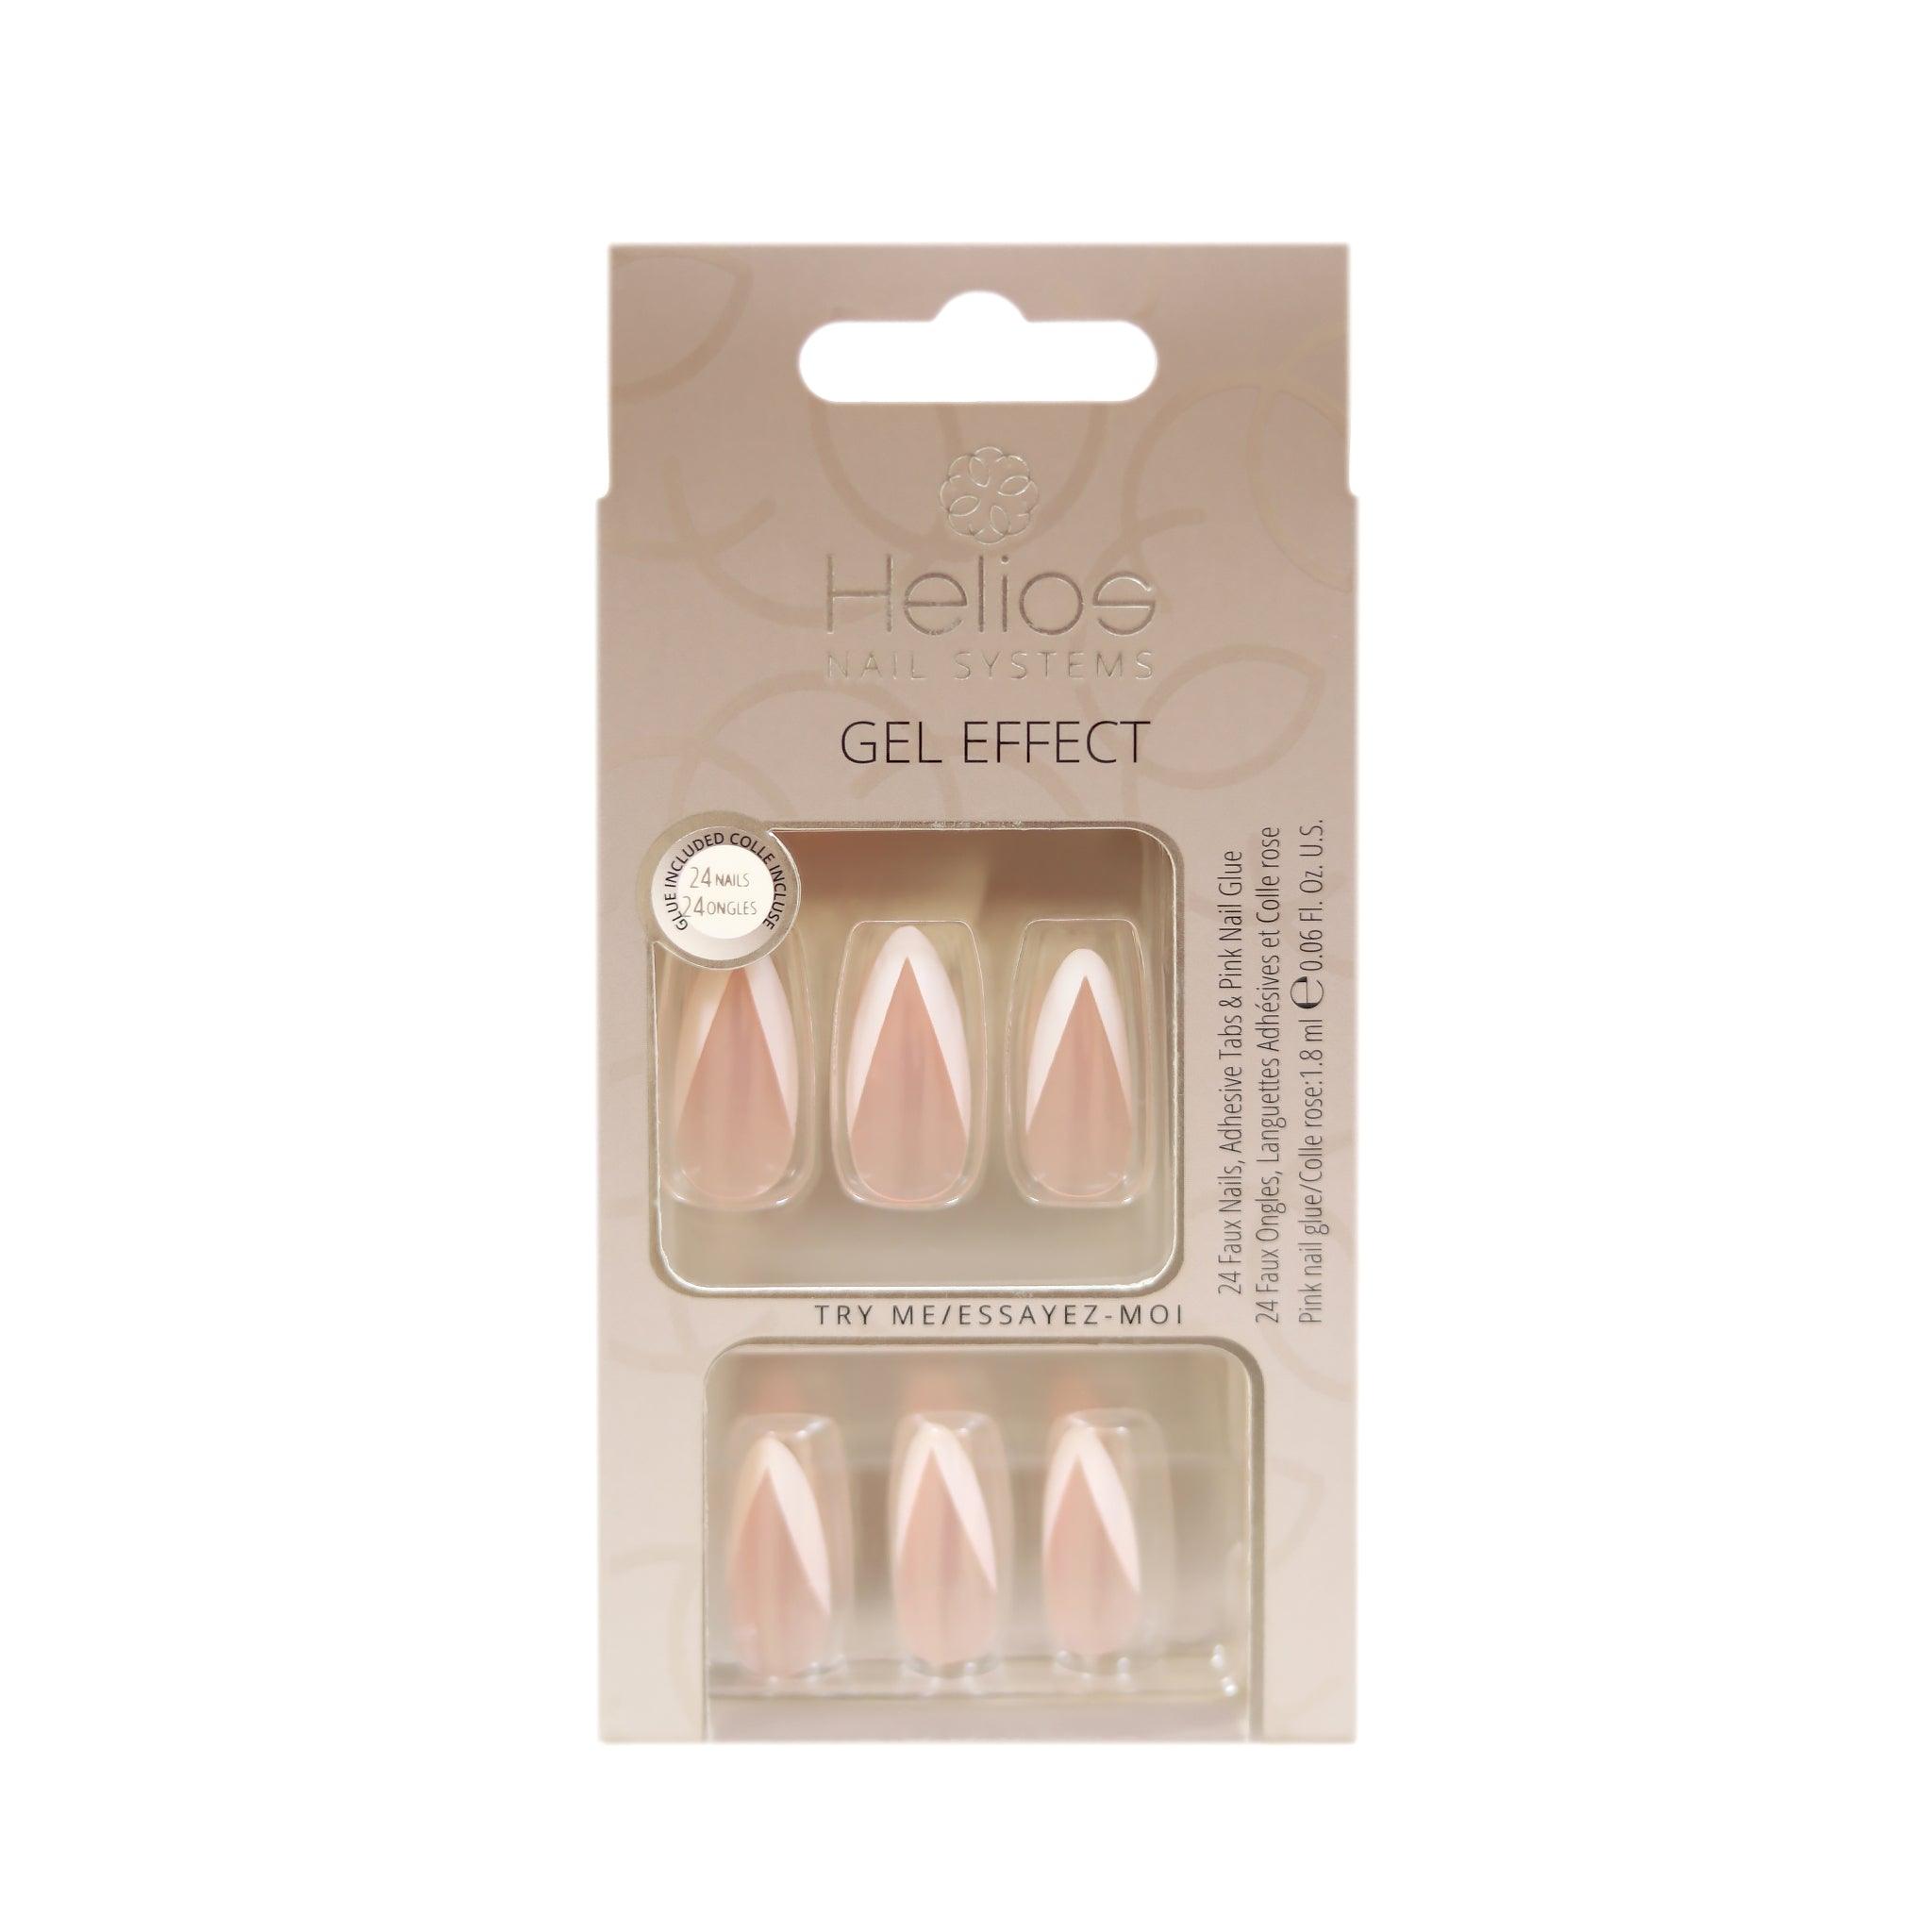 GEL EFFECT ARTIFICIAL NAILS - Helios Nail Systems